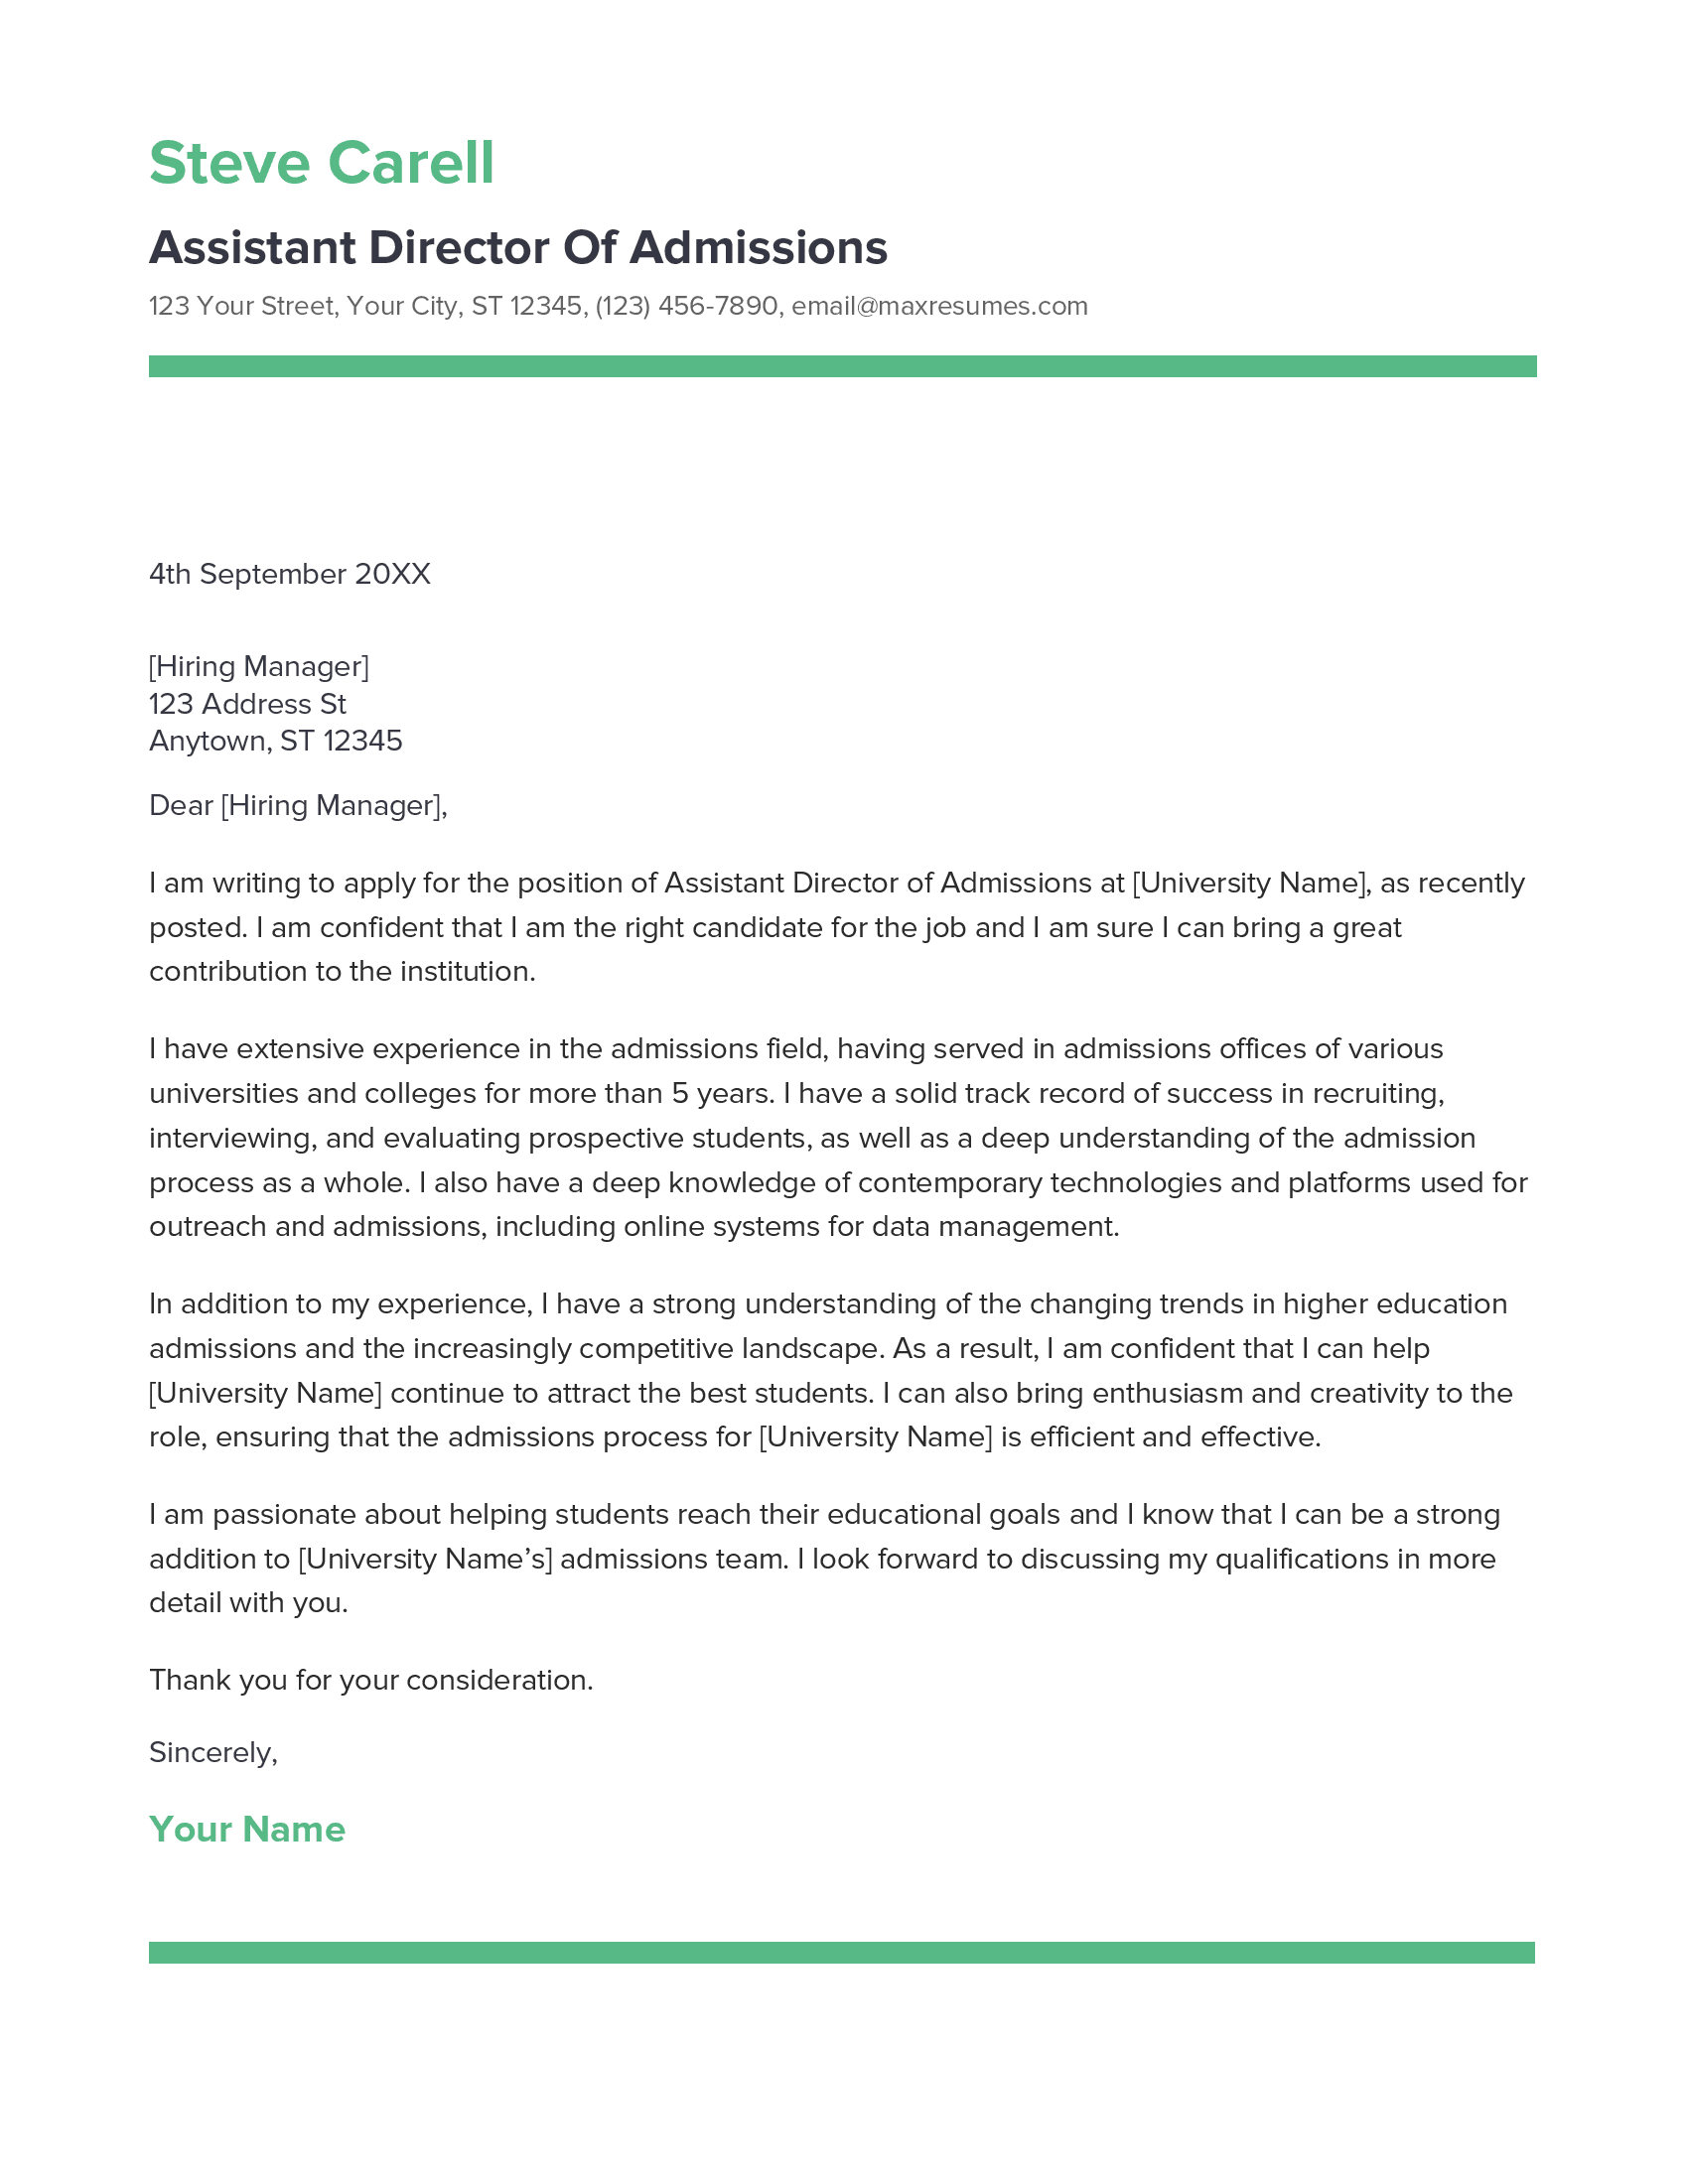 Assistant Director Of Admissions Cover Letter Example